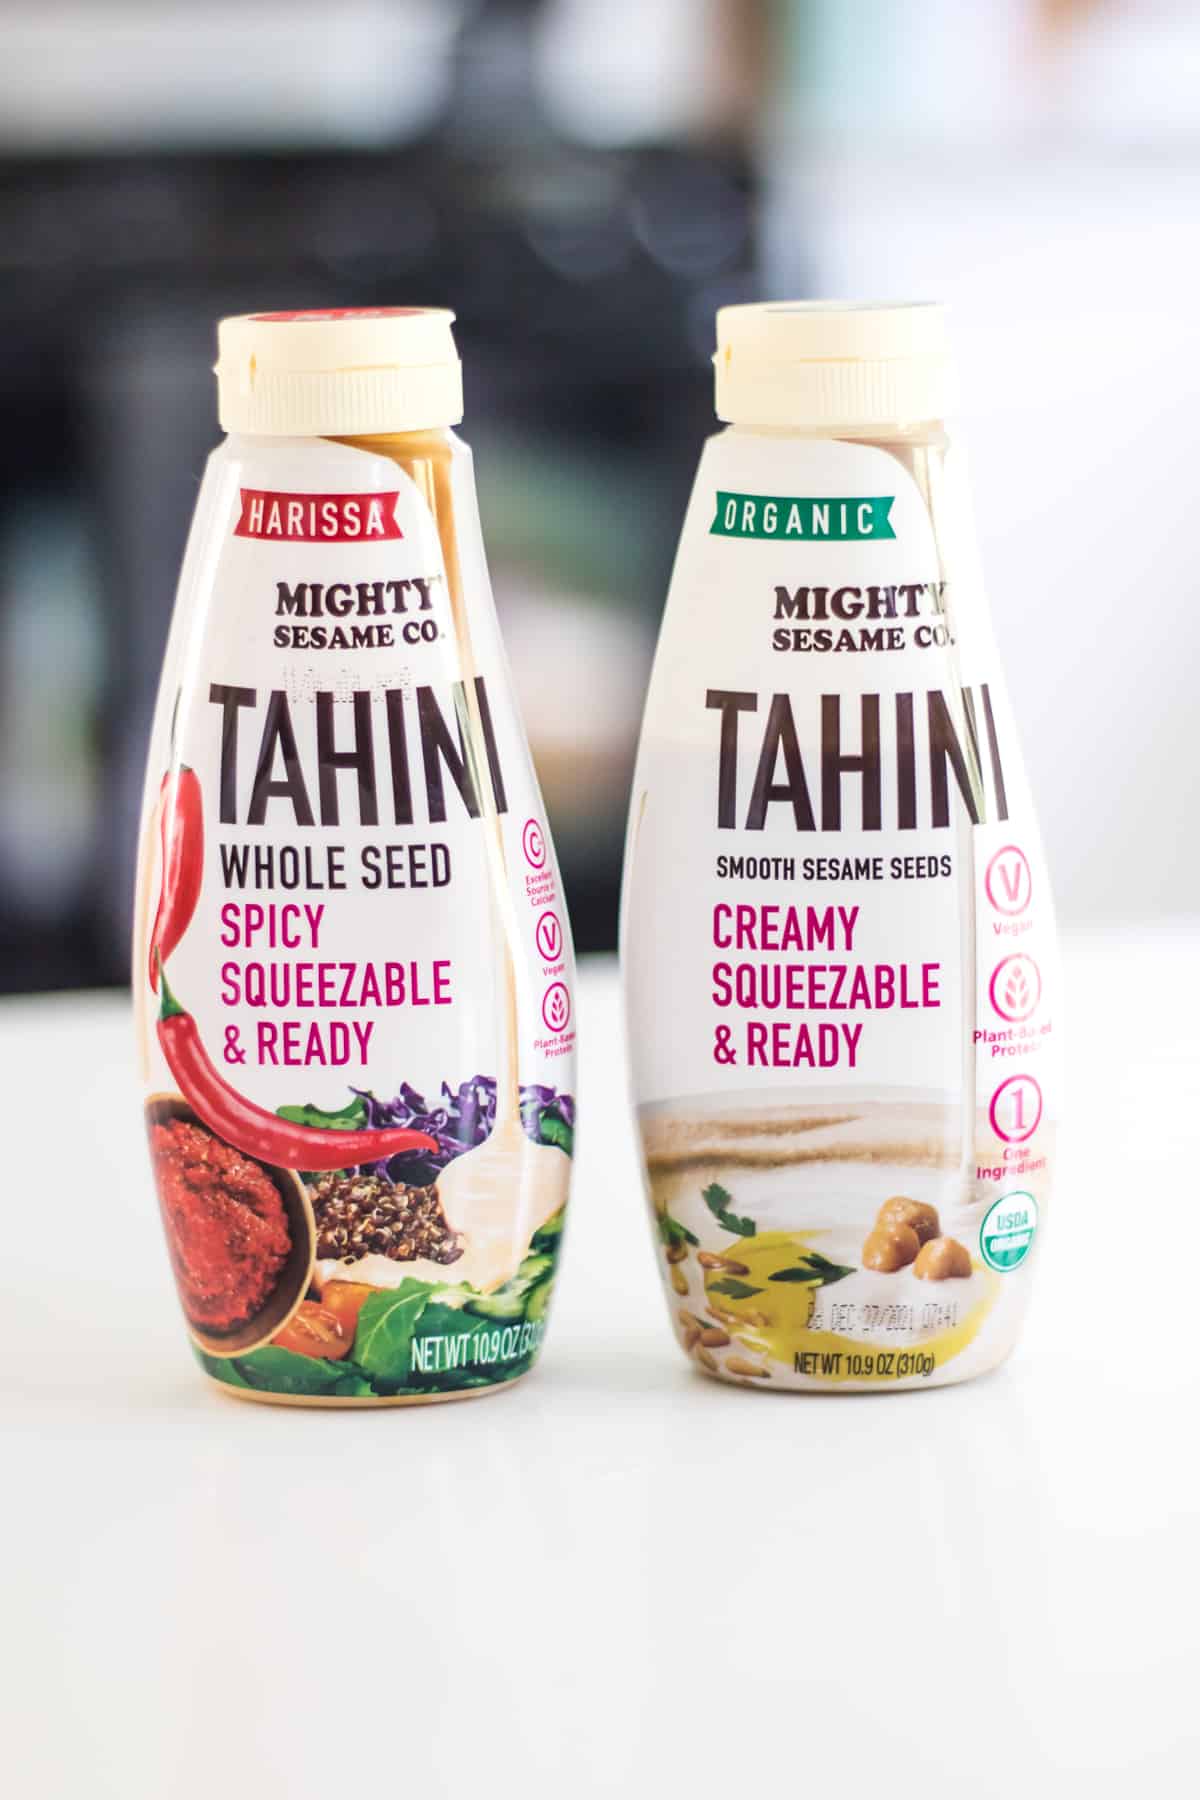 Two bottles of squeezable tahini from The Mighty Sesame Company